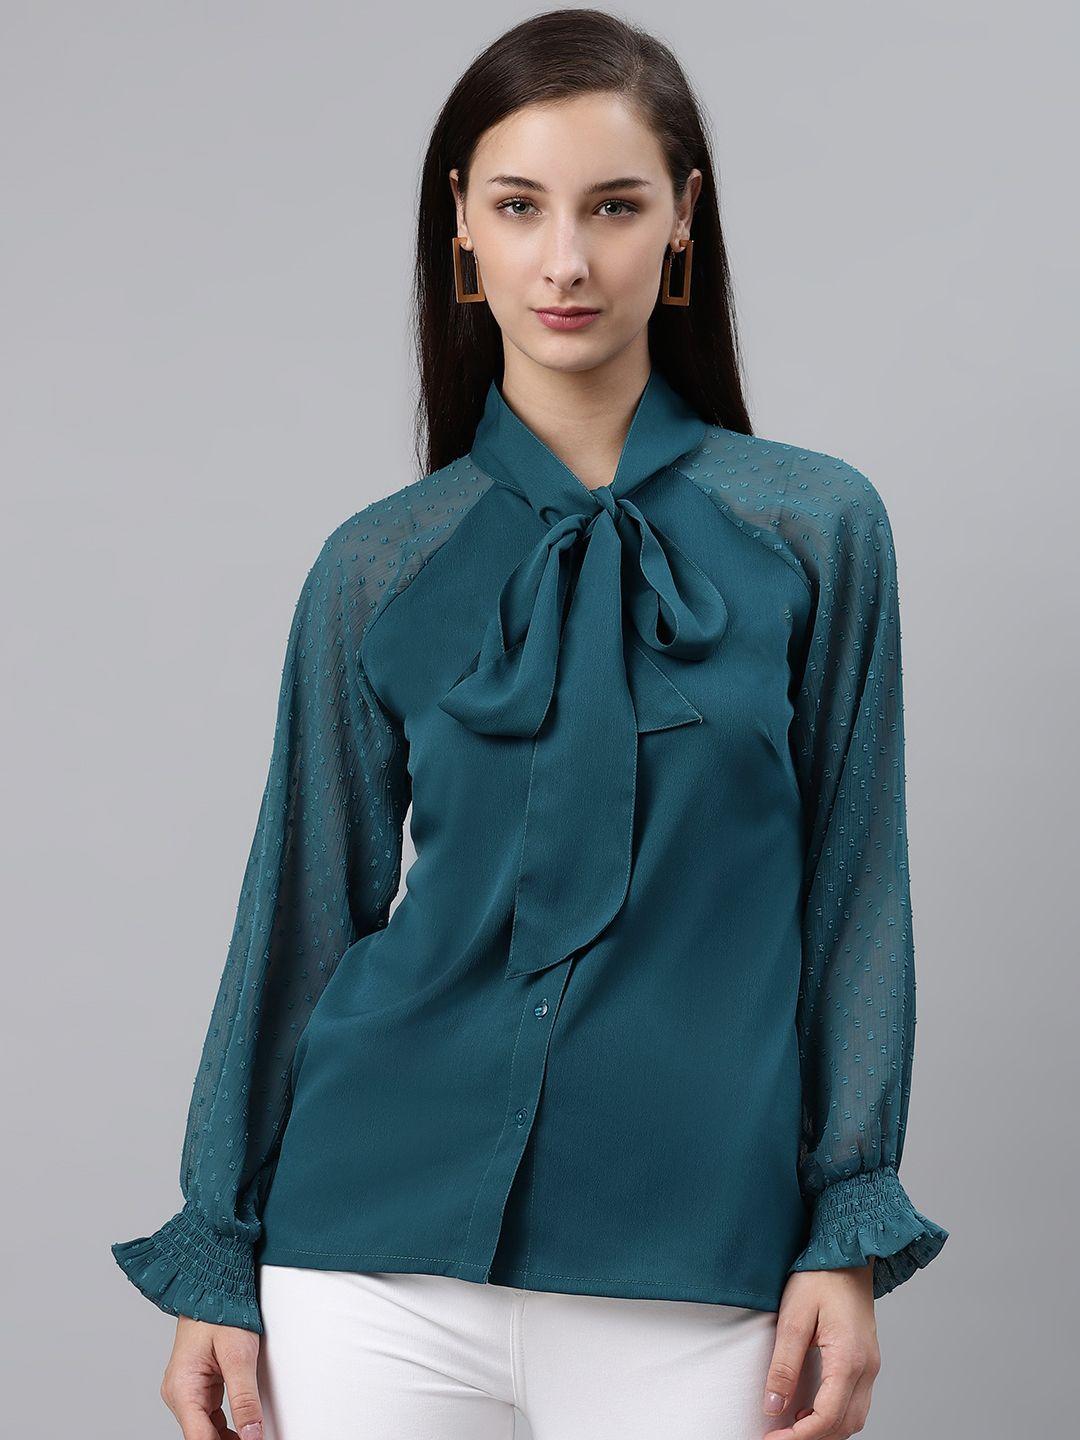 pluss teal blue solid tie-up neck top with dobby weave detail